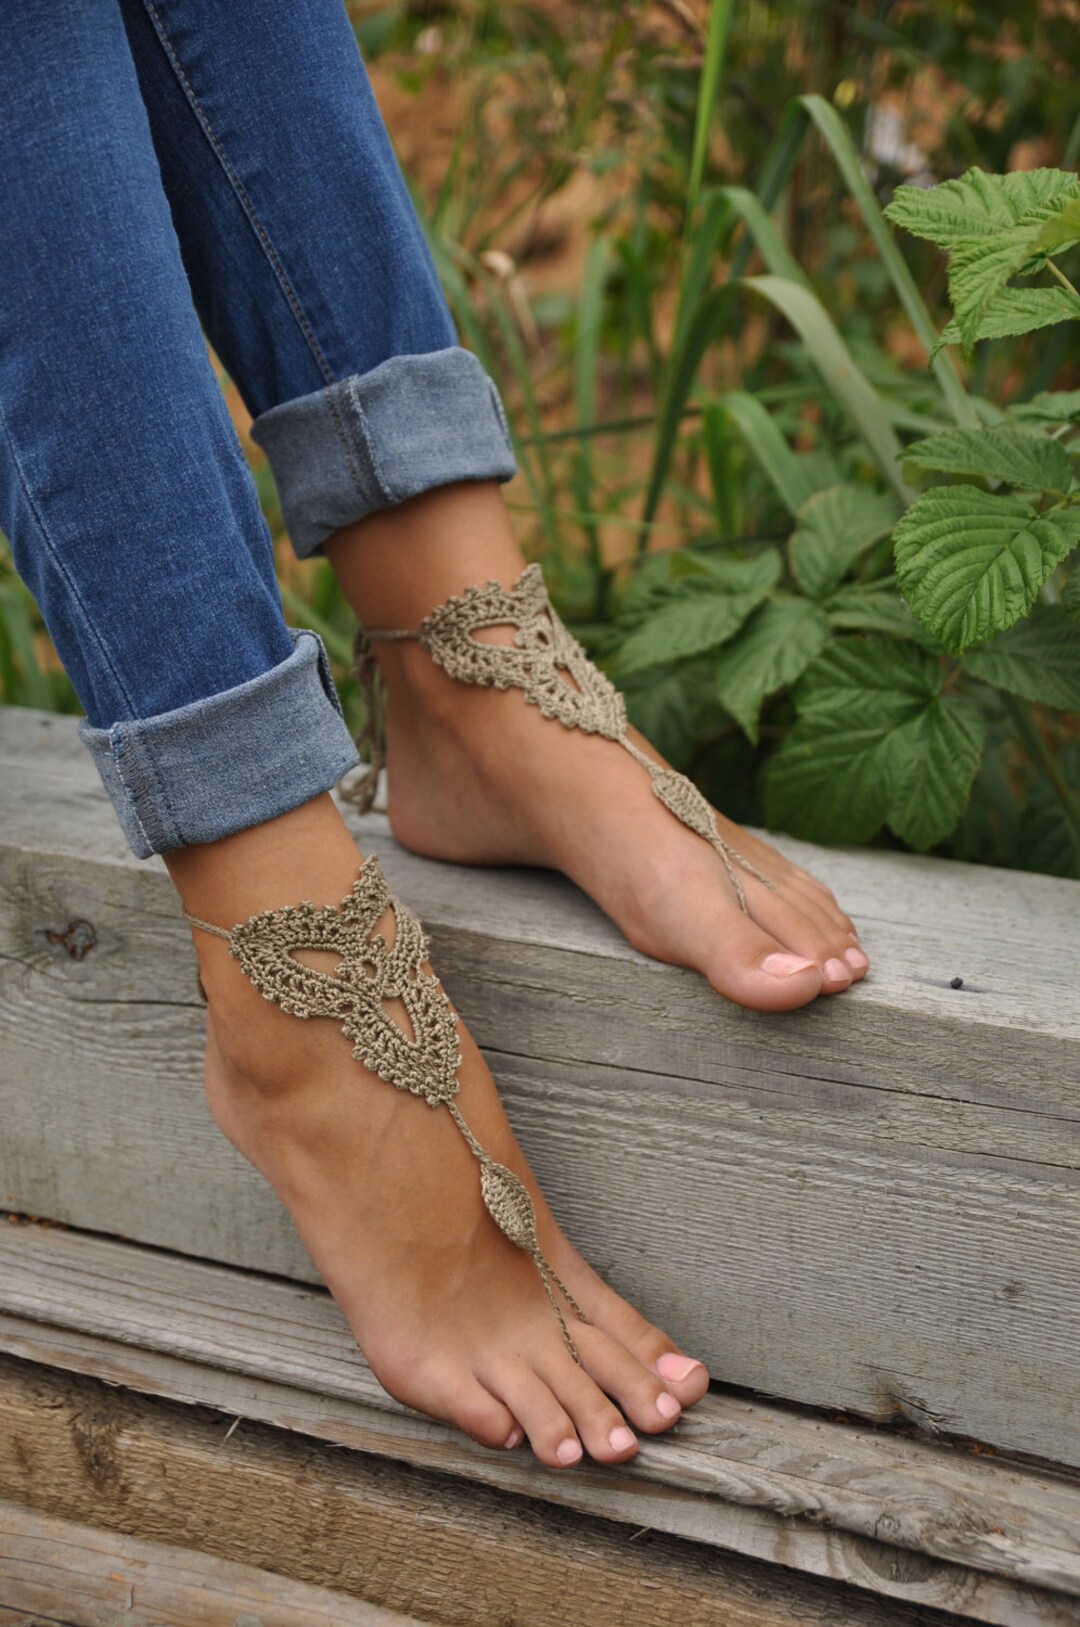 Crochet Tan Barefoot Sandals Taupe Nude Shoes Foot Jewelry